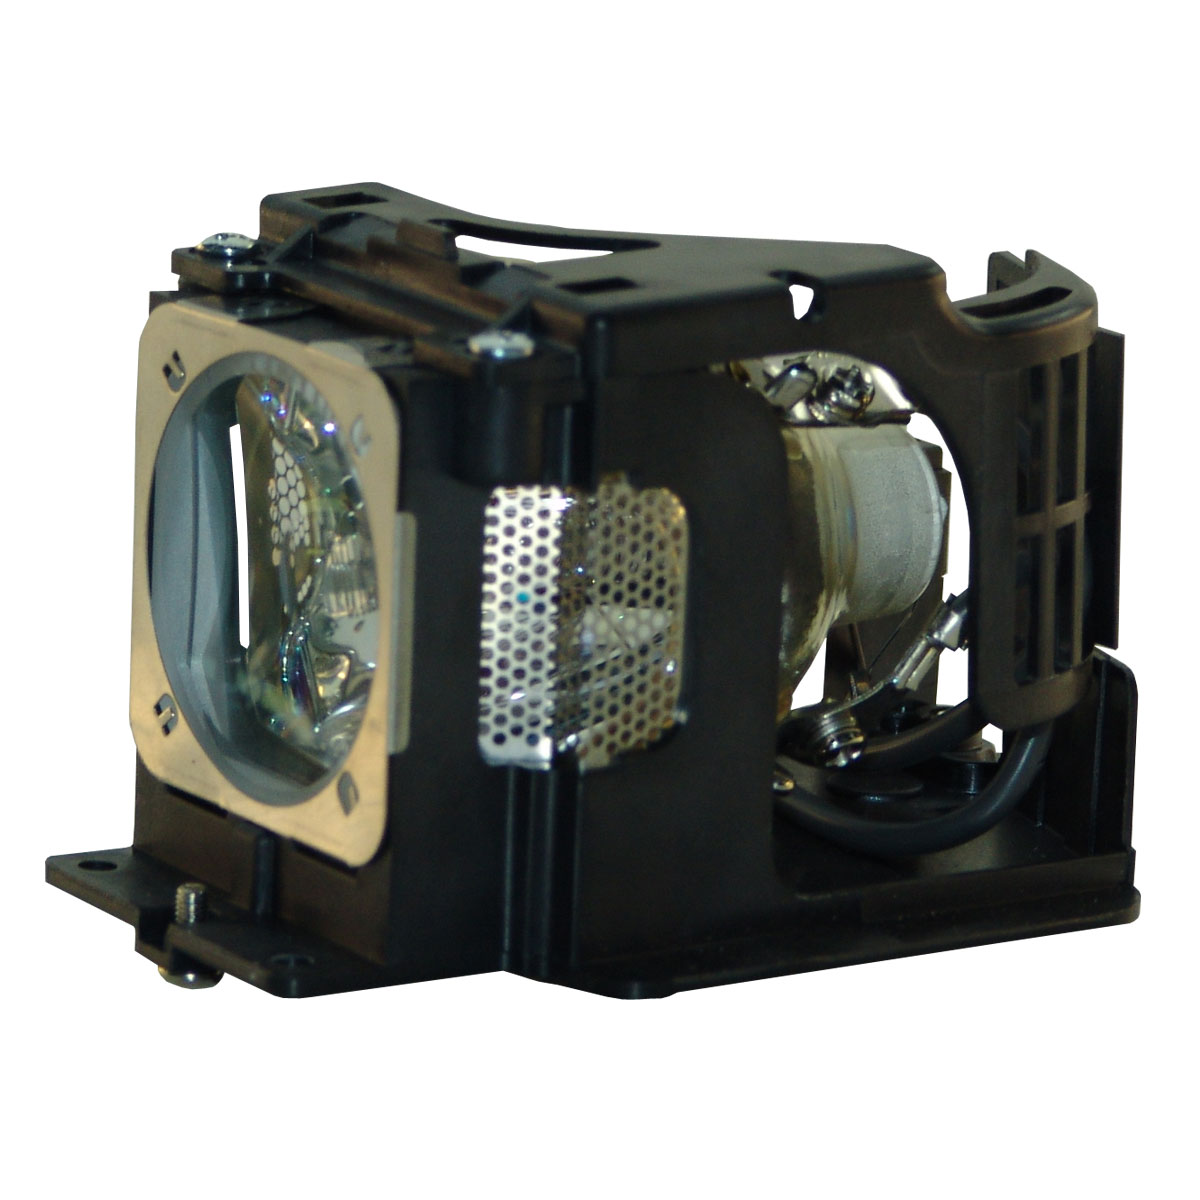 OEM 610-334-9565 Replacement Lamp & Housing for Sanyo Projectors - image 2 of 6